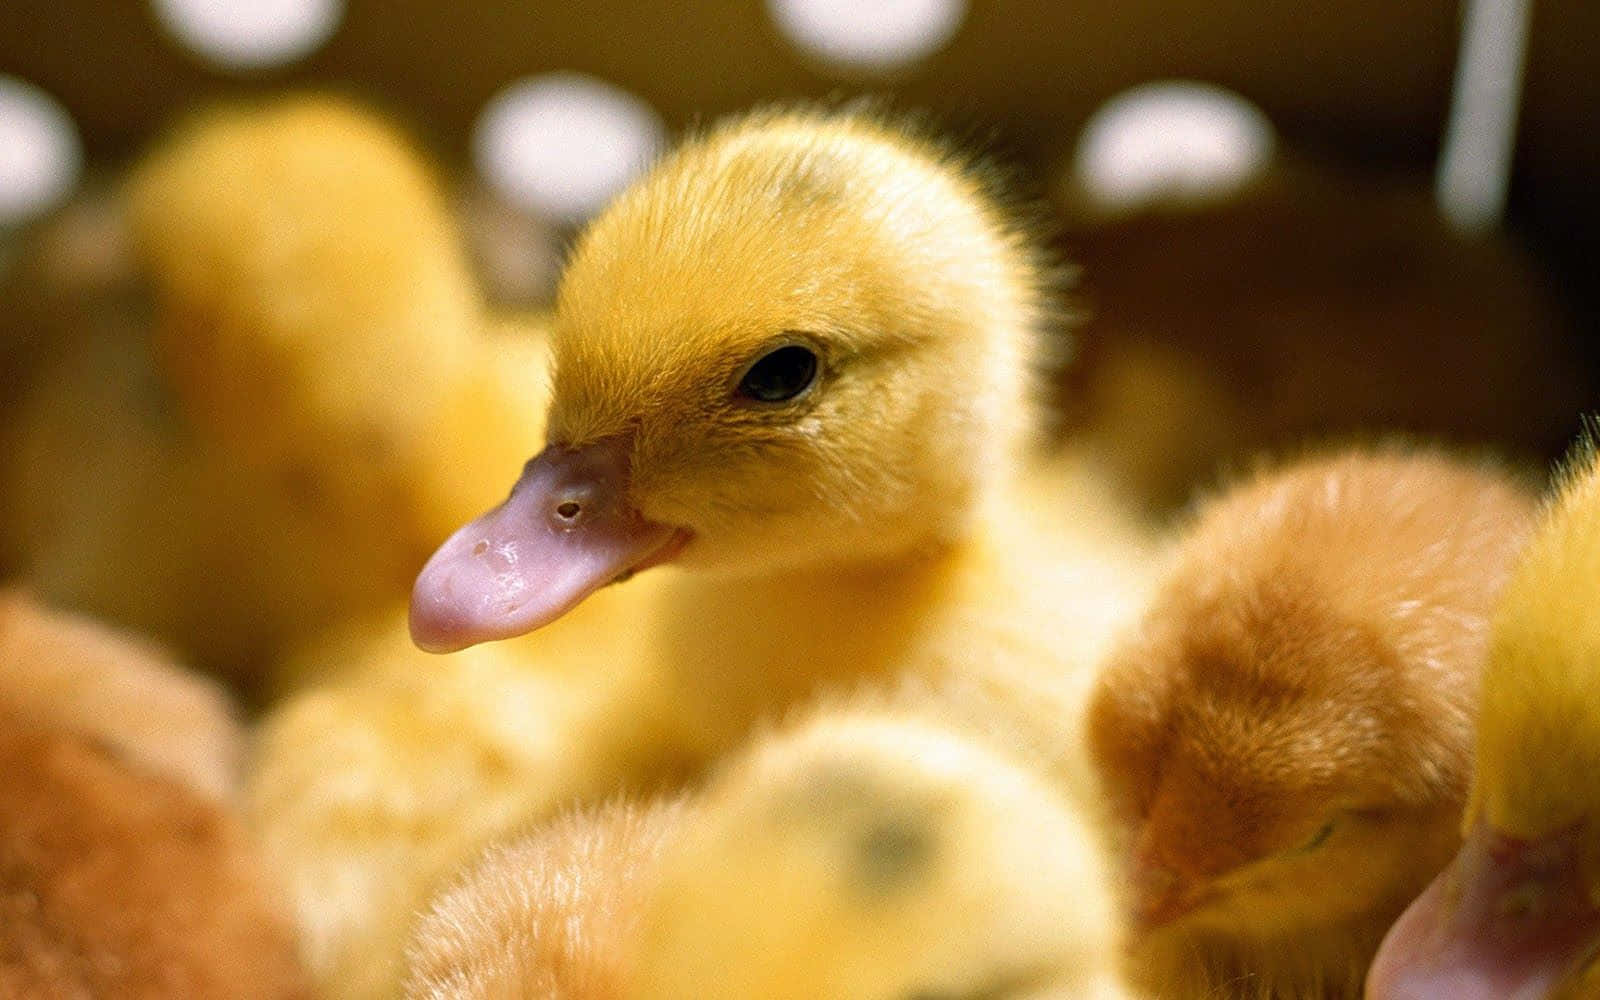 Who can resist the cuteness of this adorable duck? Wallpaper